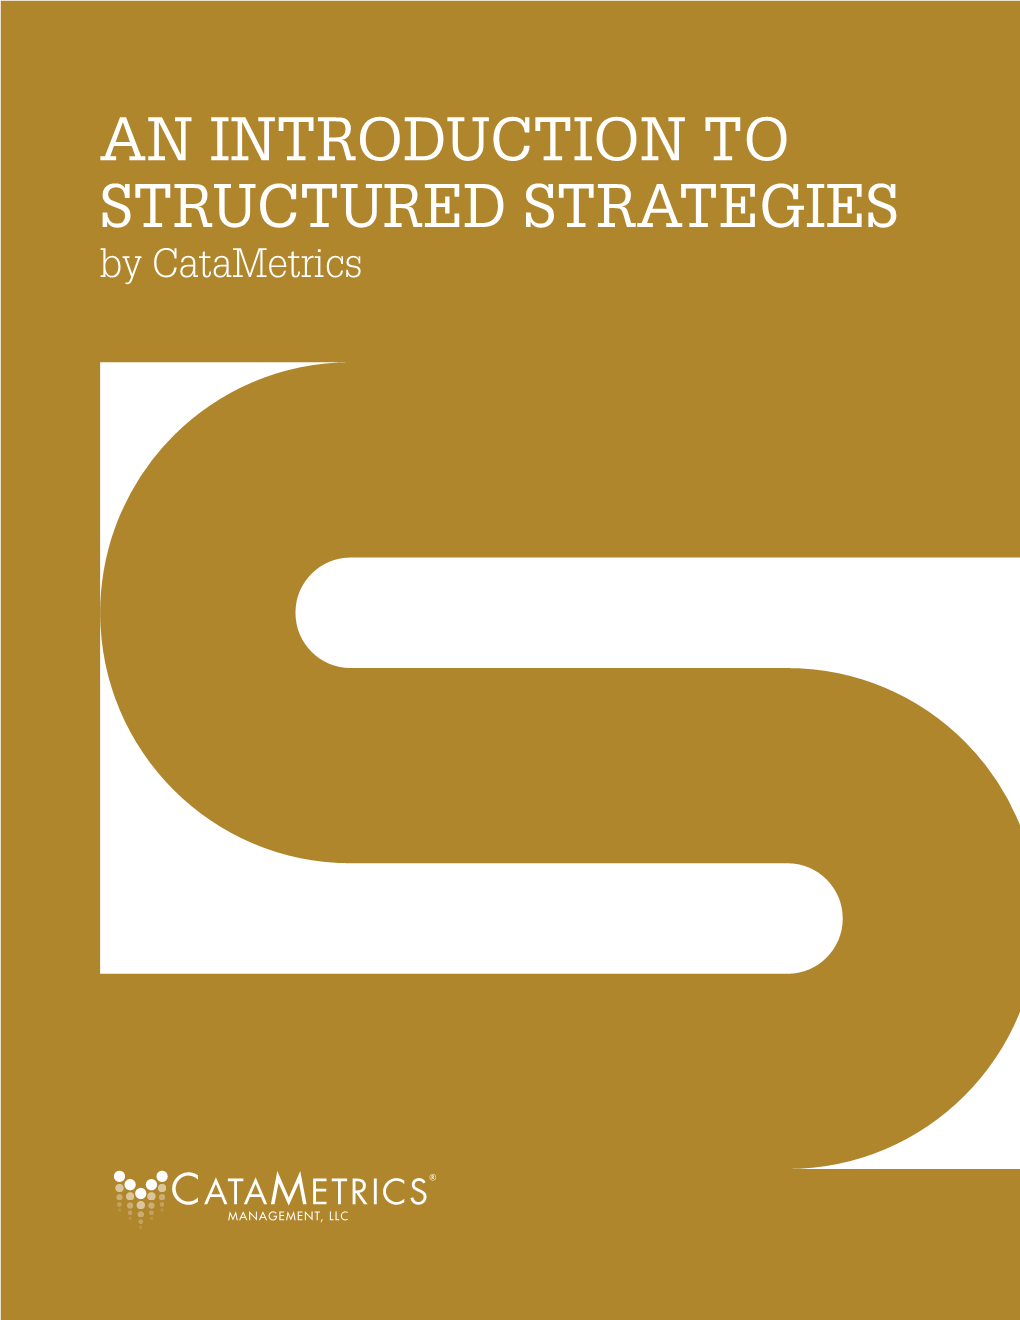 AN INTRODUCTION to STRUCTURED STRATEGIES by Catametrics Copyright © 2016, 2017 Catametrics Management, LLC